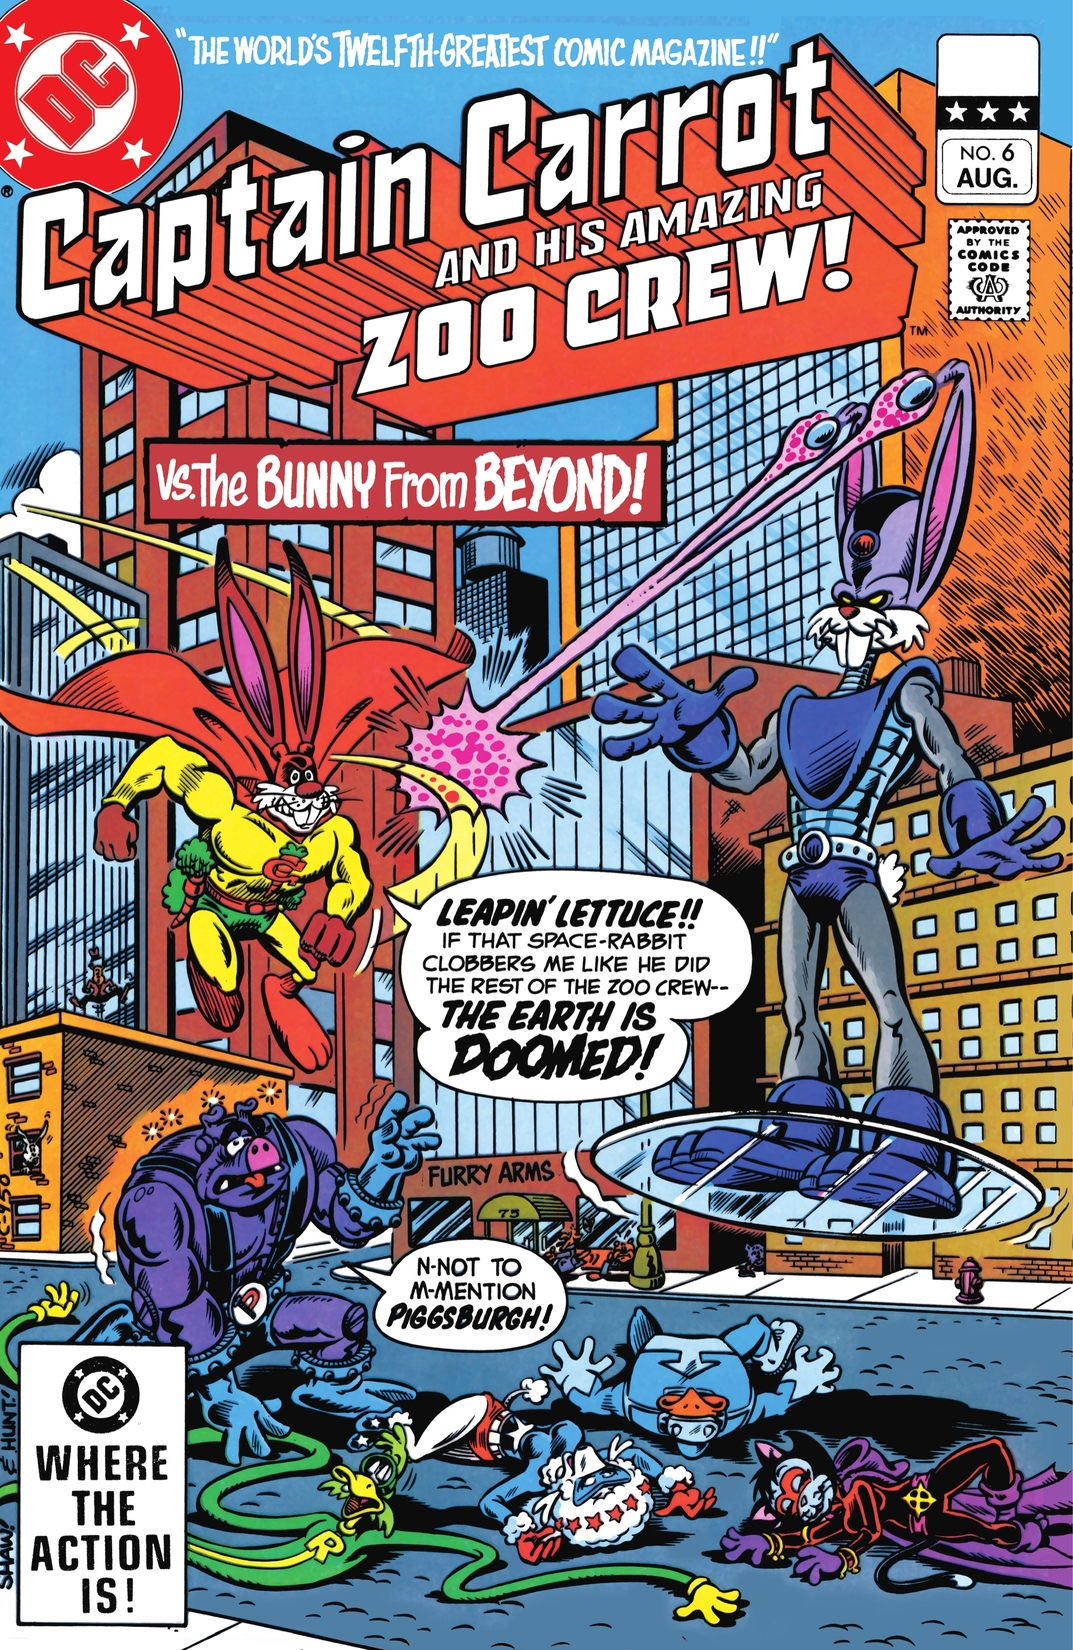 Captain Carrot and His Amazing Zoo Crew #6 preview images